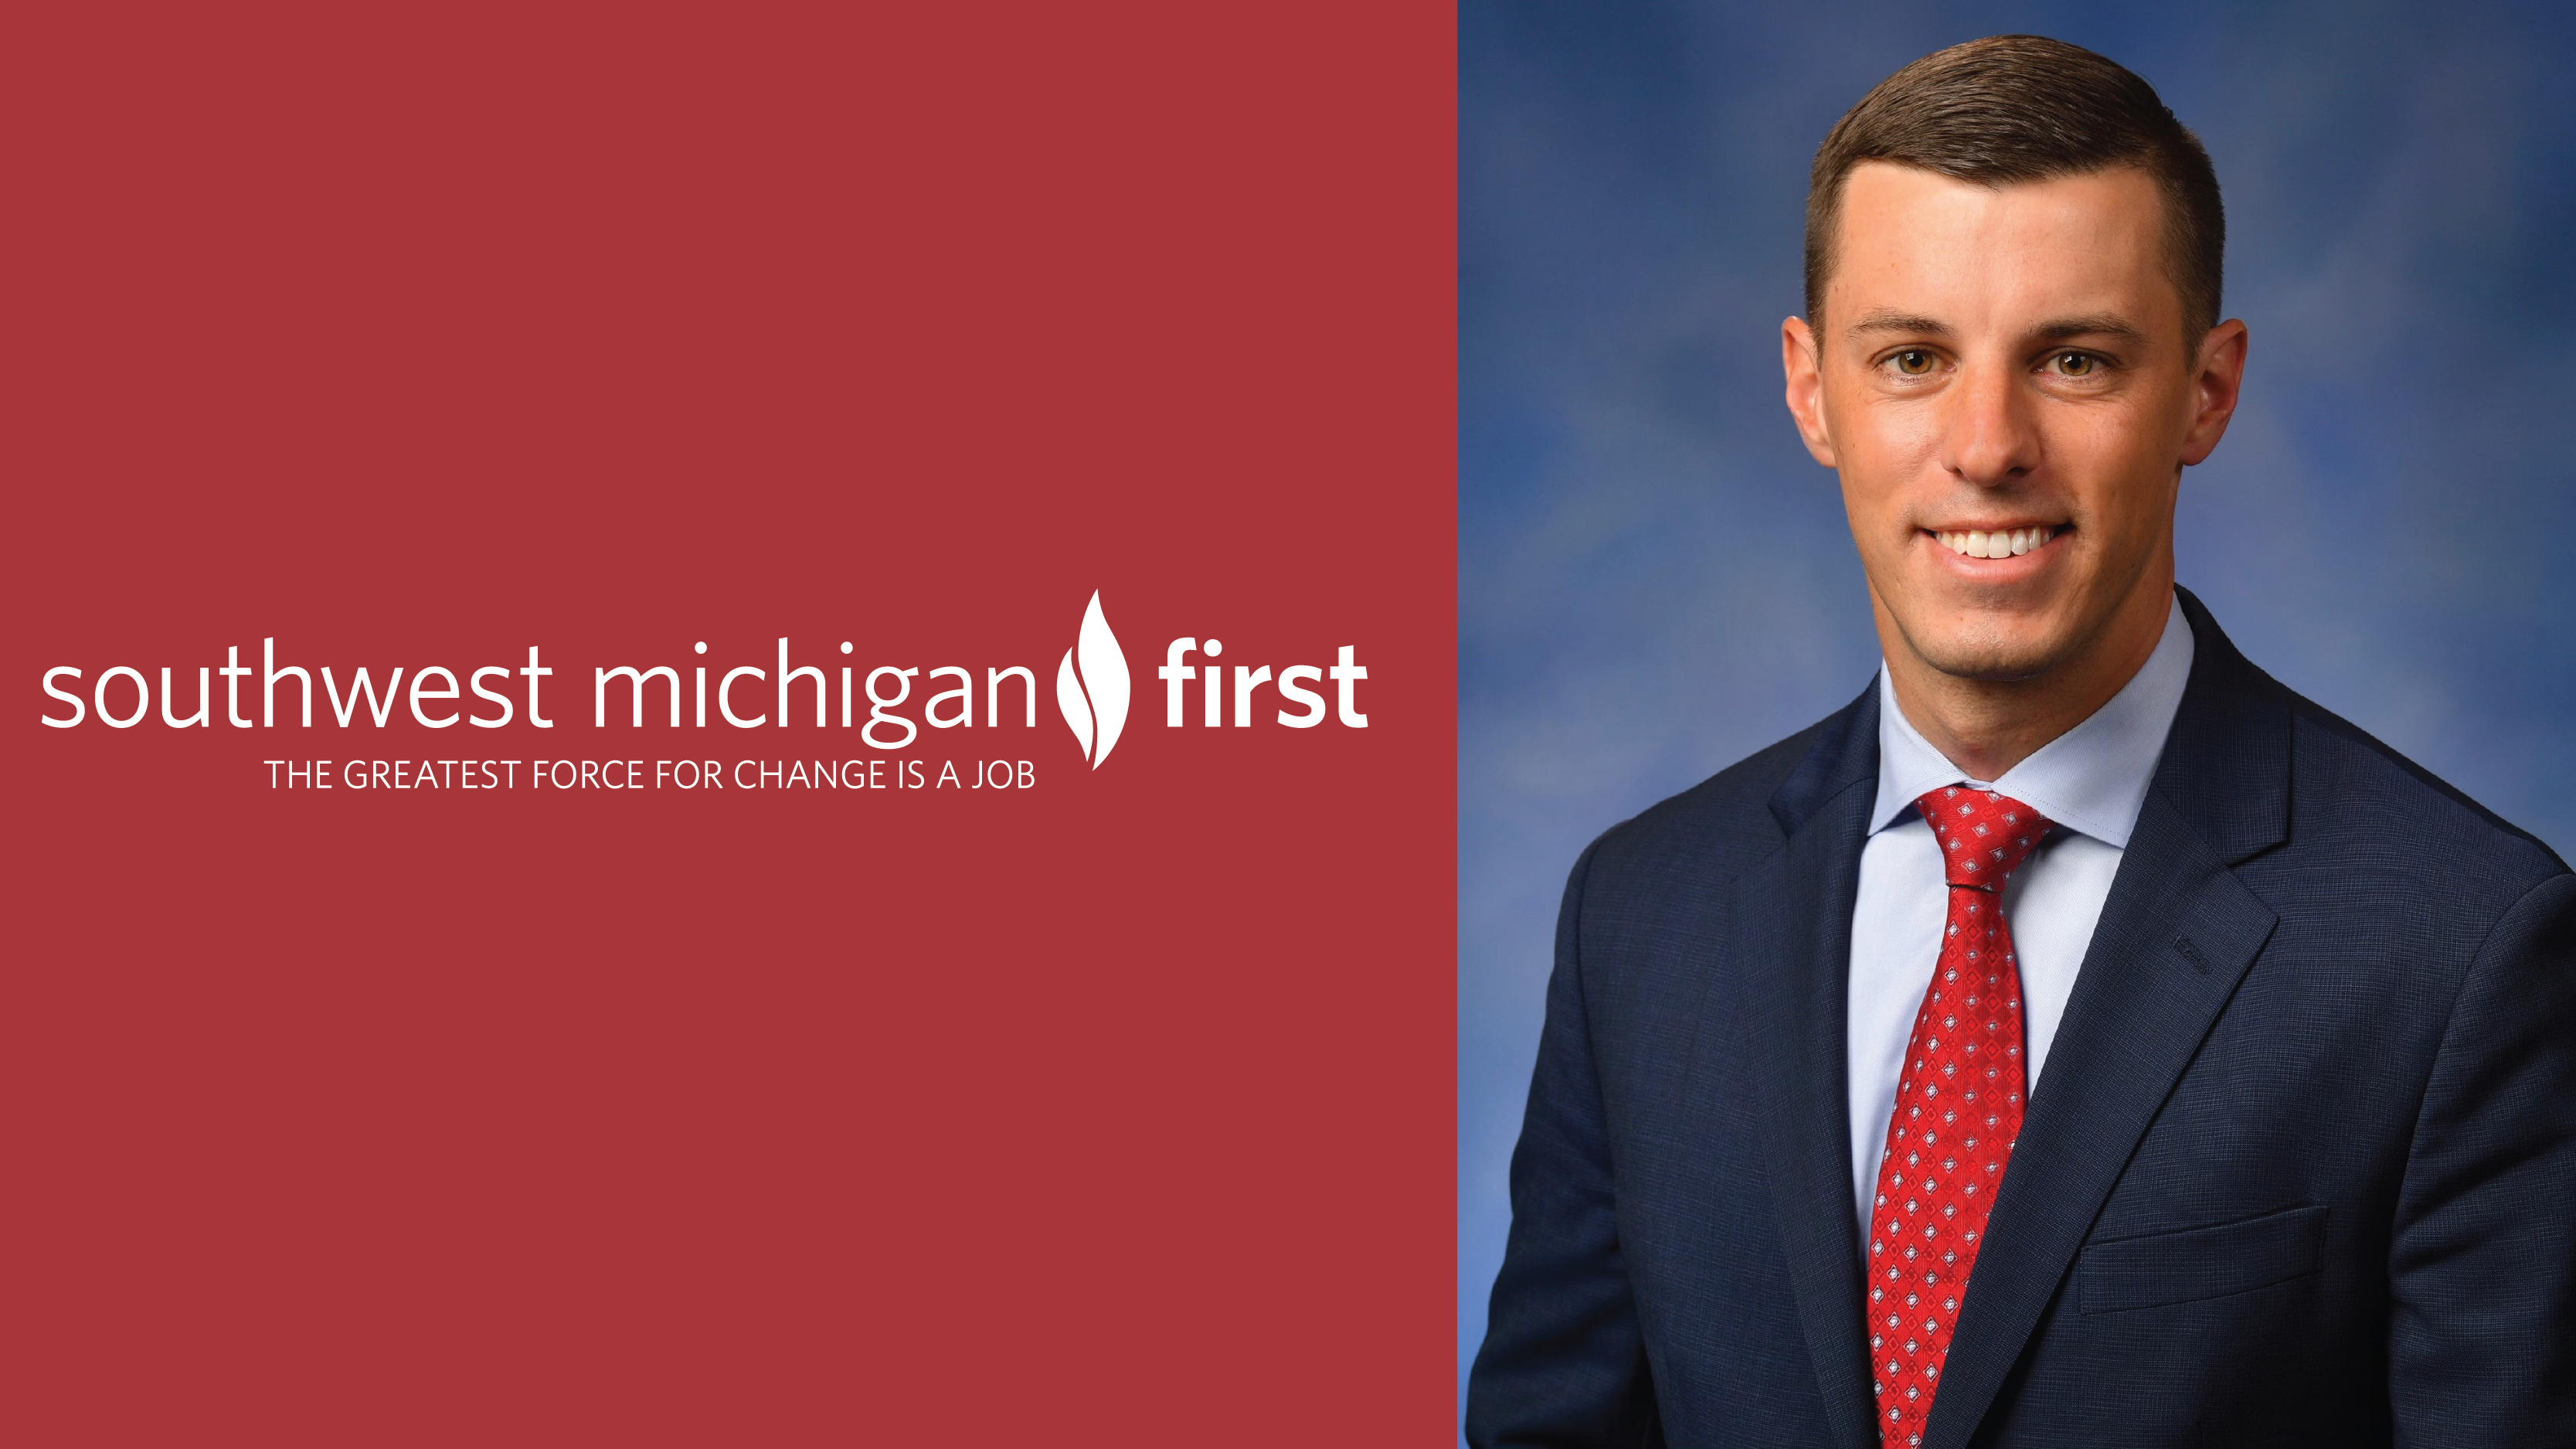 Southwest Michigan First Announces Lee Chatfield as New CEO - FIRST & 42